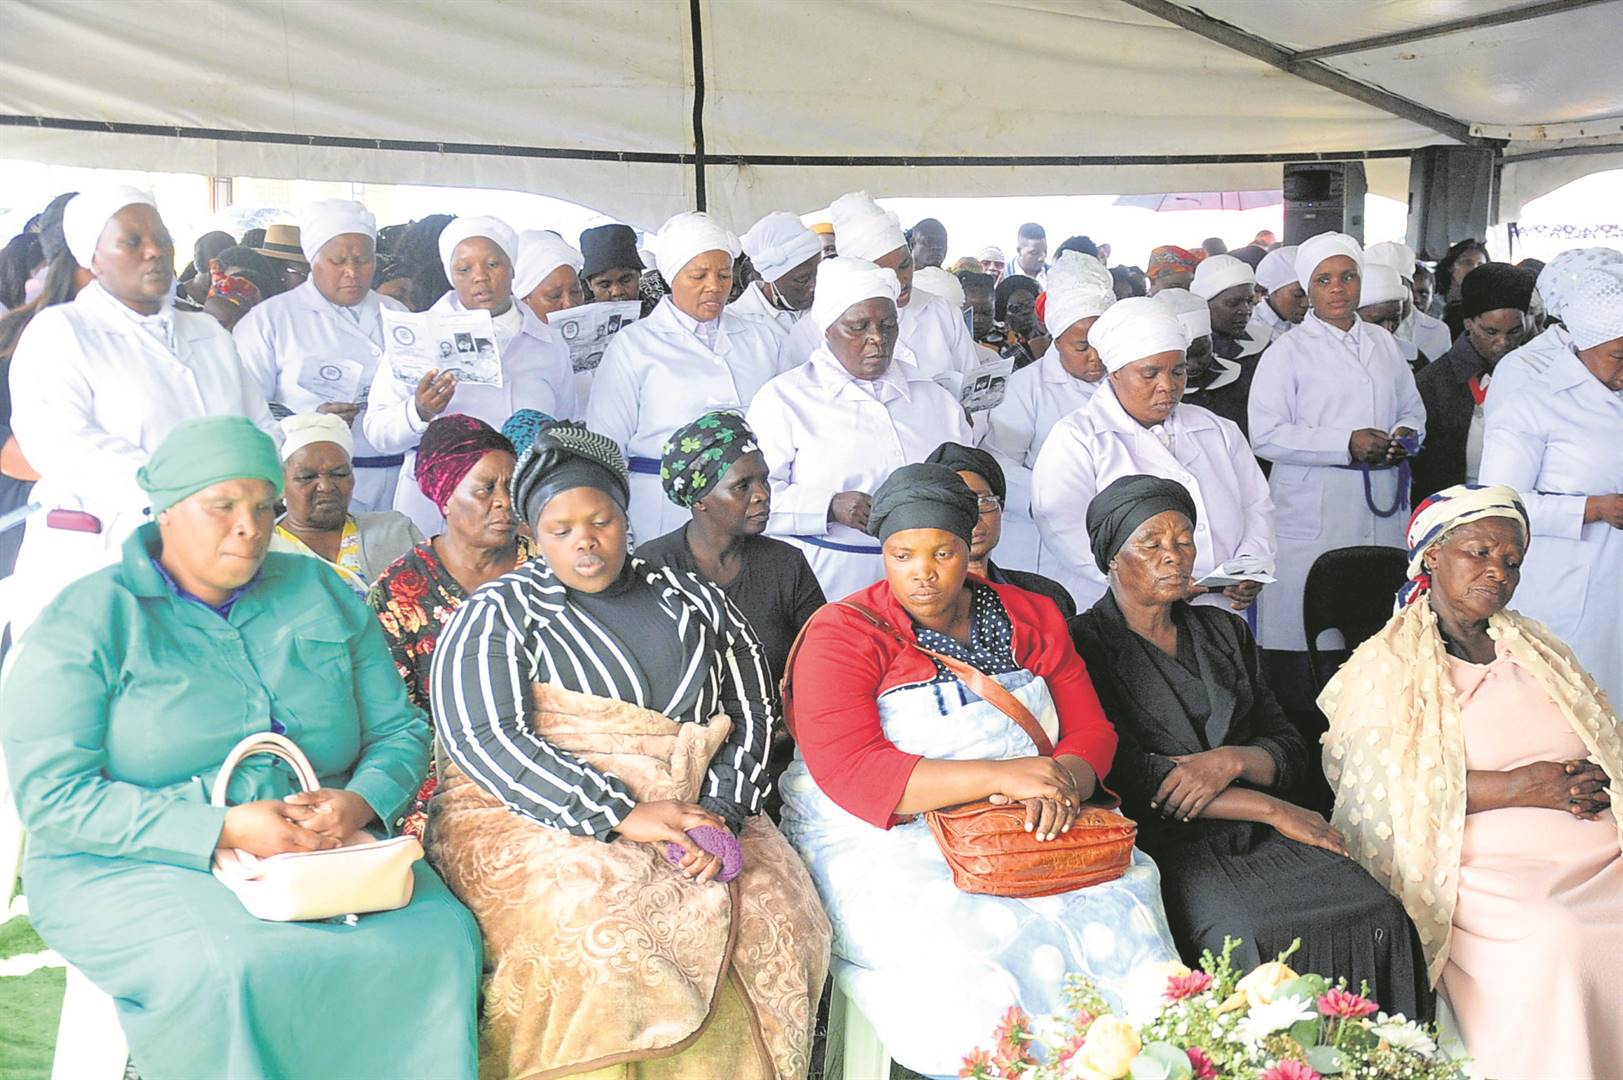 The Nhlangulela family and mourners at the funeral service of their loved ones in Verulam, north of Durban.   Photo by Jabulani Langa